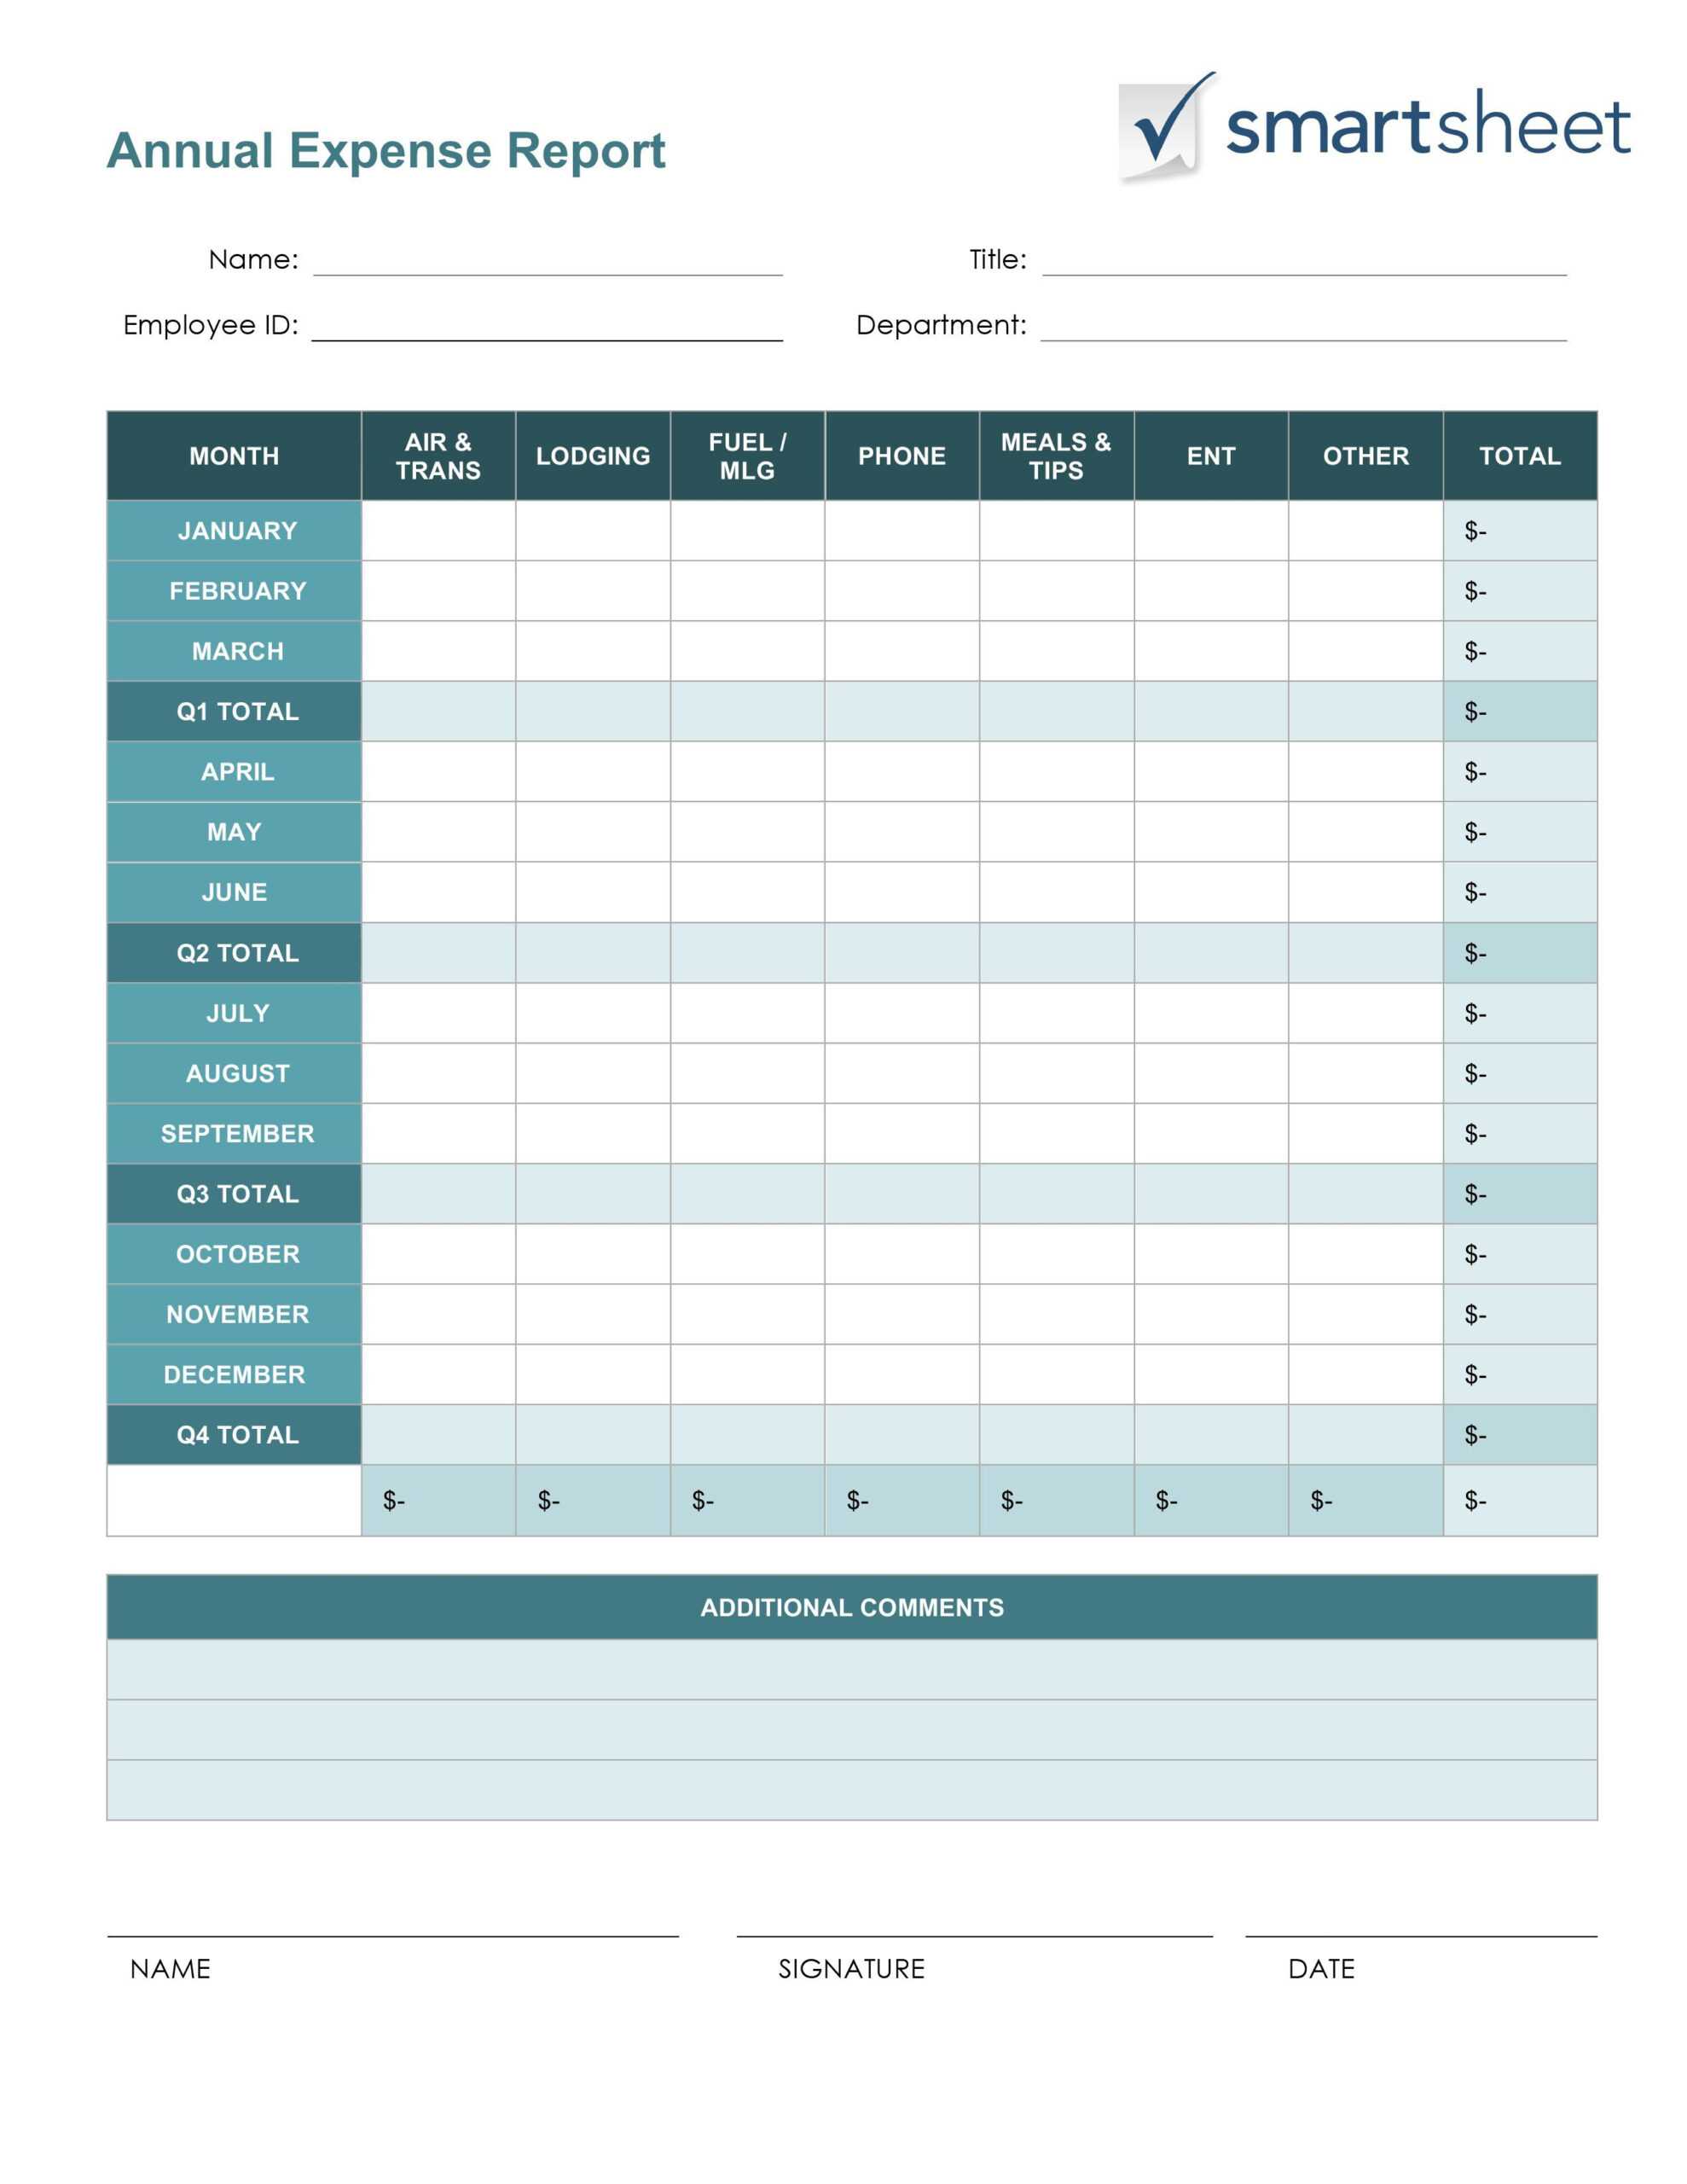 Employee Expense Report Template | 11+ Free Docs, Xlsx & Pdf With Regard To Expense Report Spreadsheet Template Excel